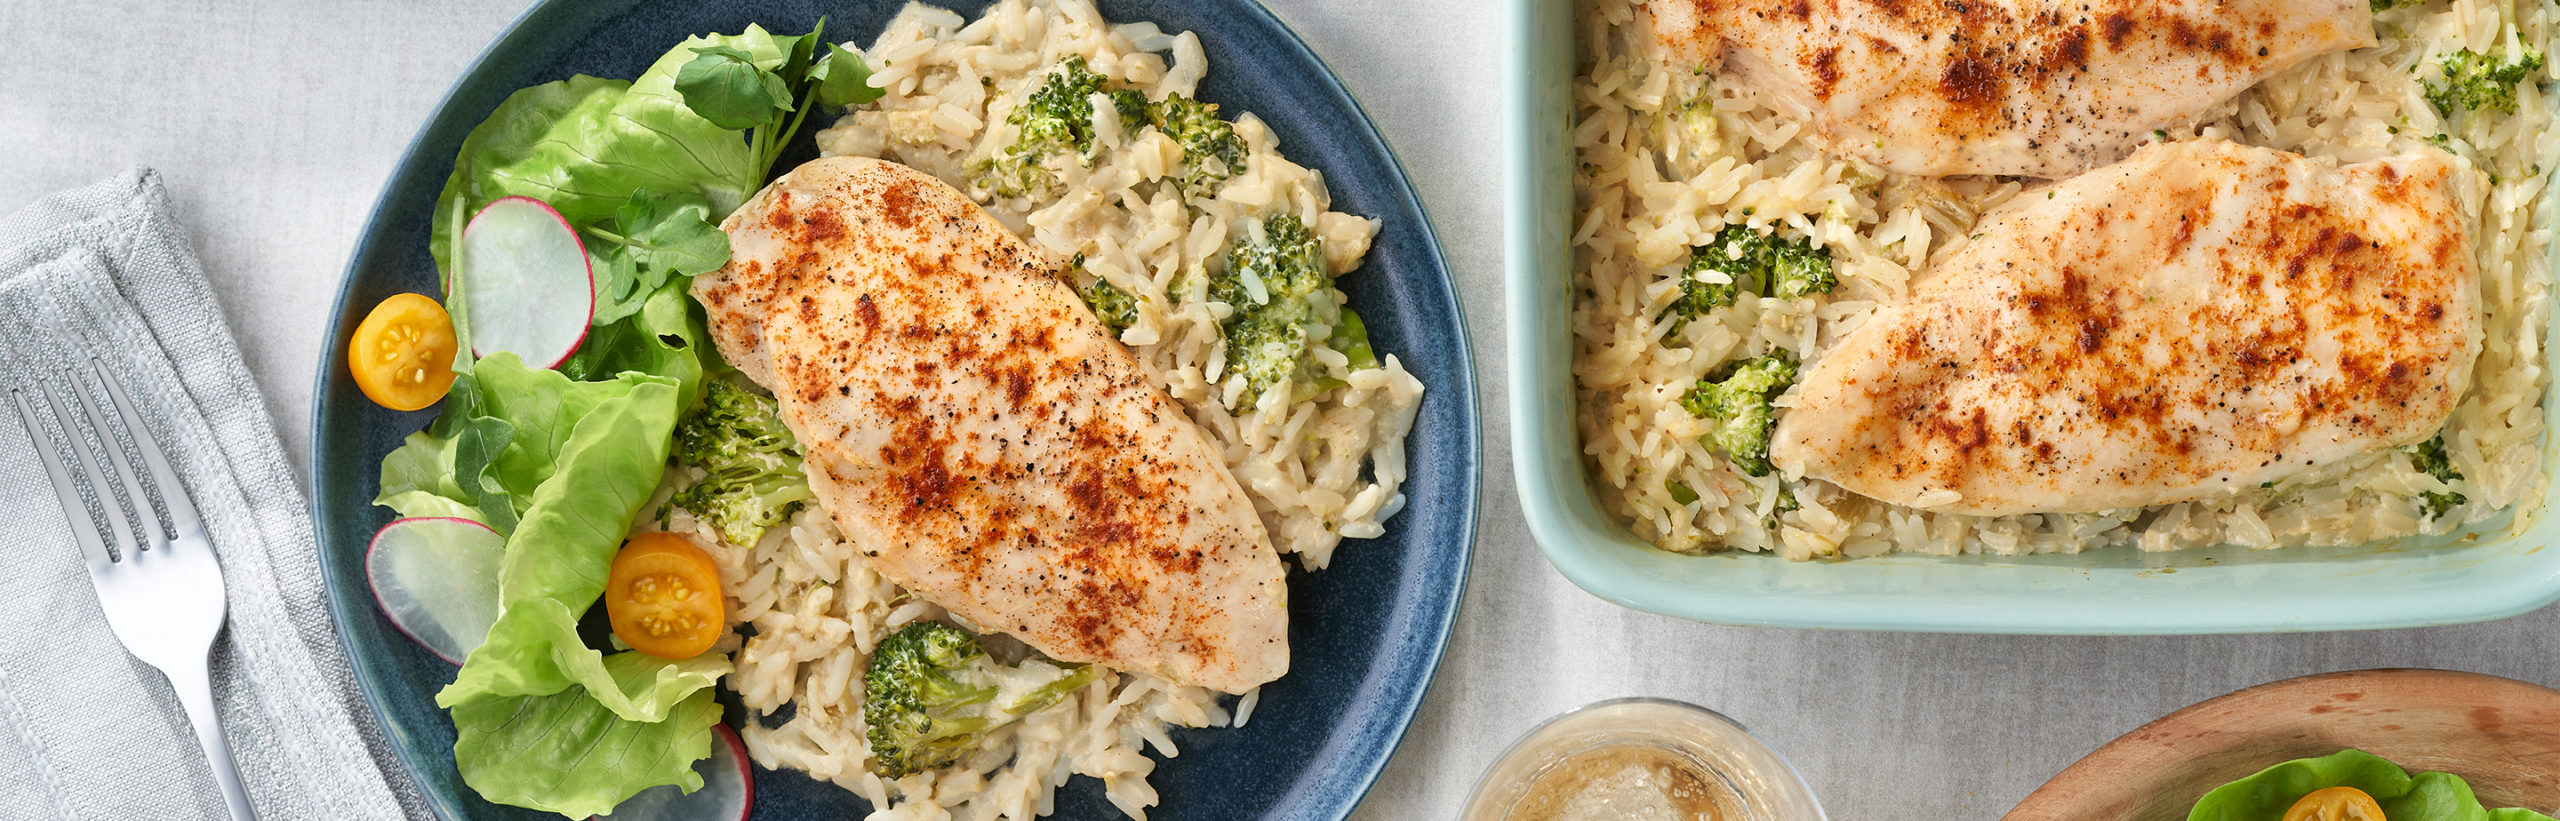 Baked Chicken Broccoli Rice Campbell Soup Company